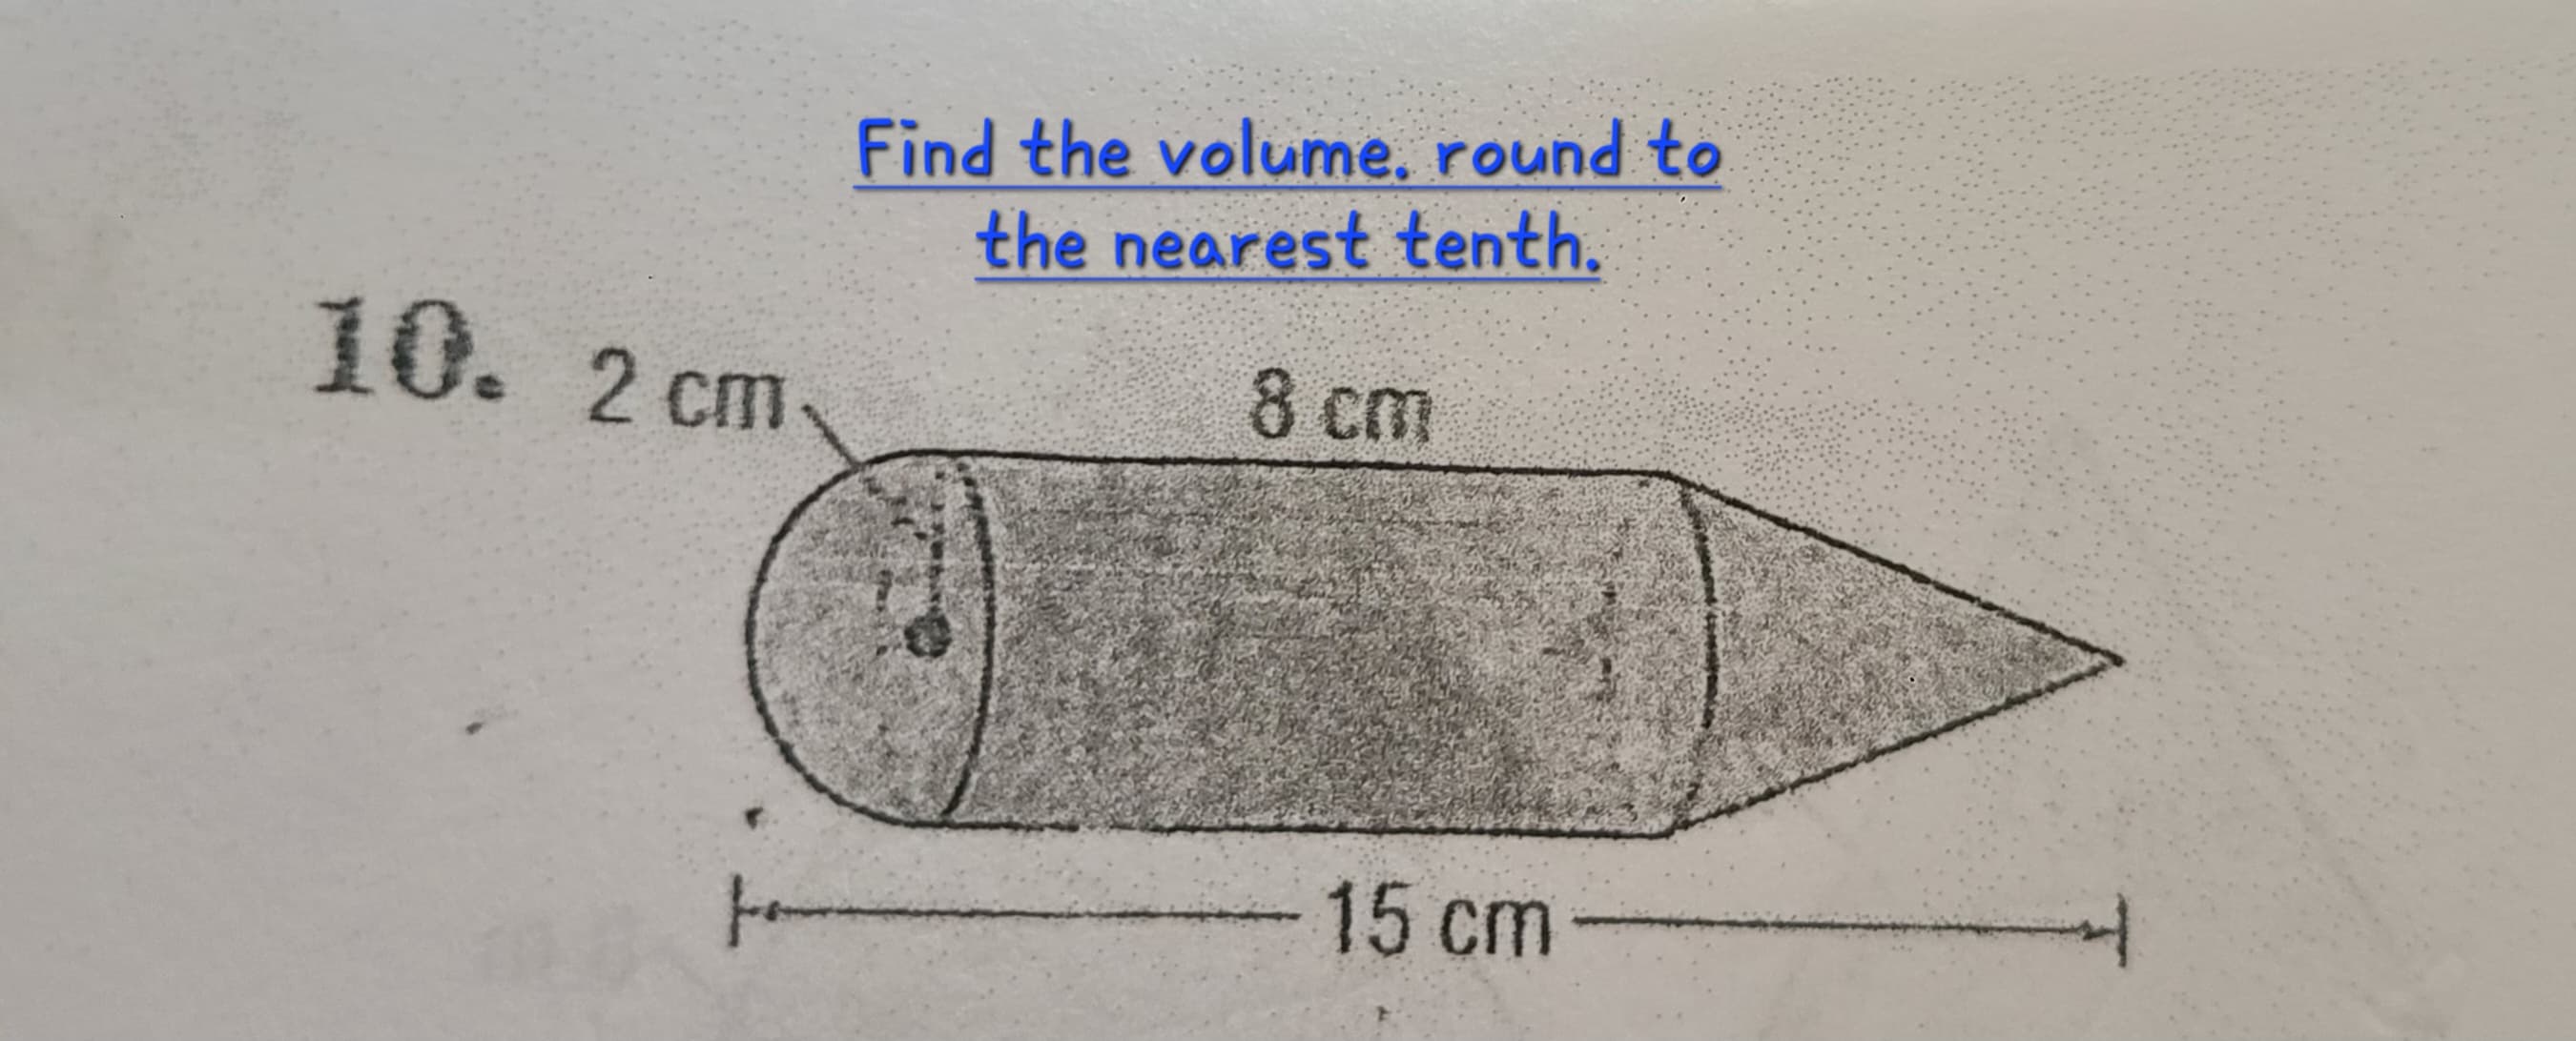 10. 2 cm-
Find the volume, round to
the nearest tenth.
8 cm
15 cm